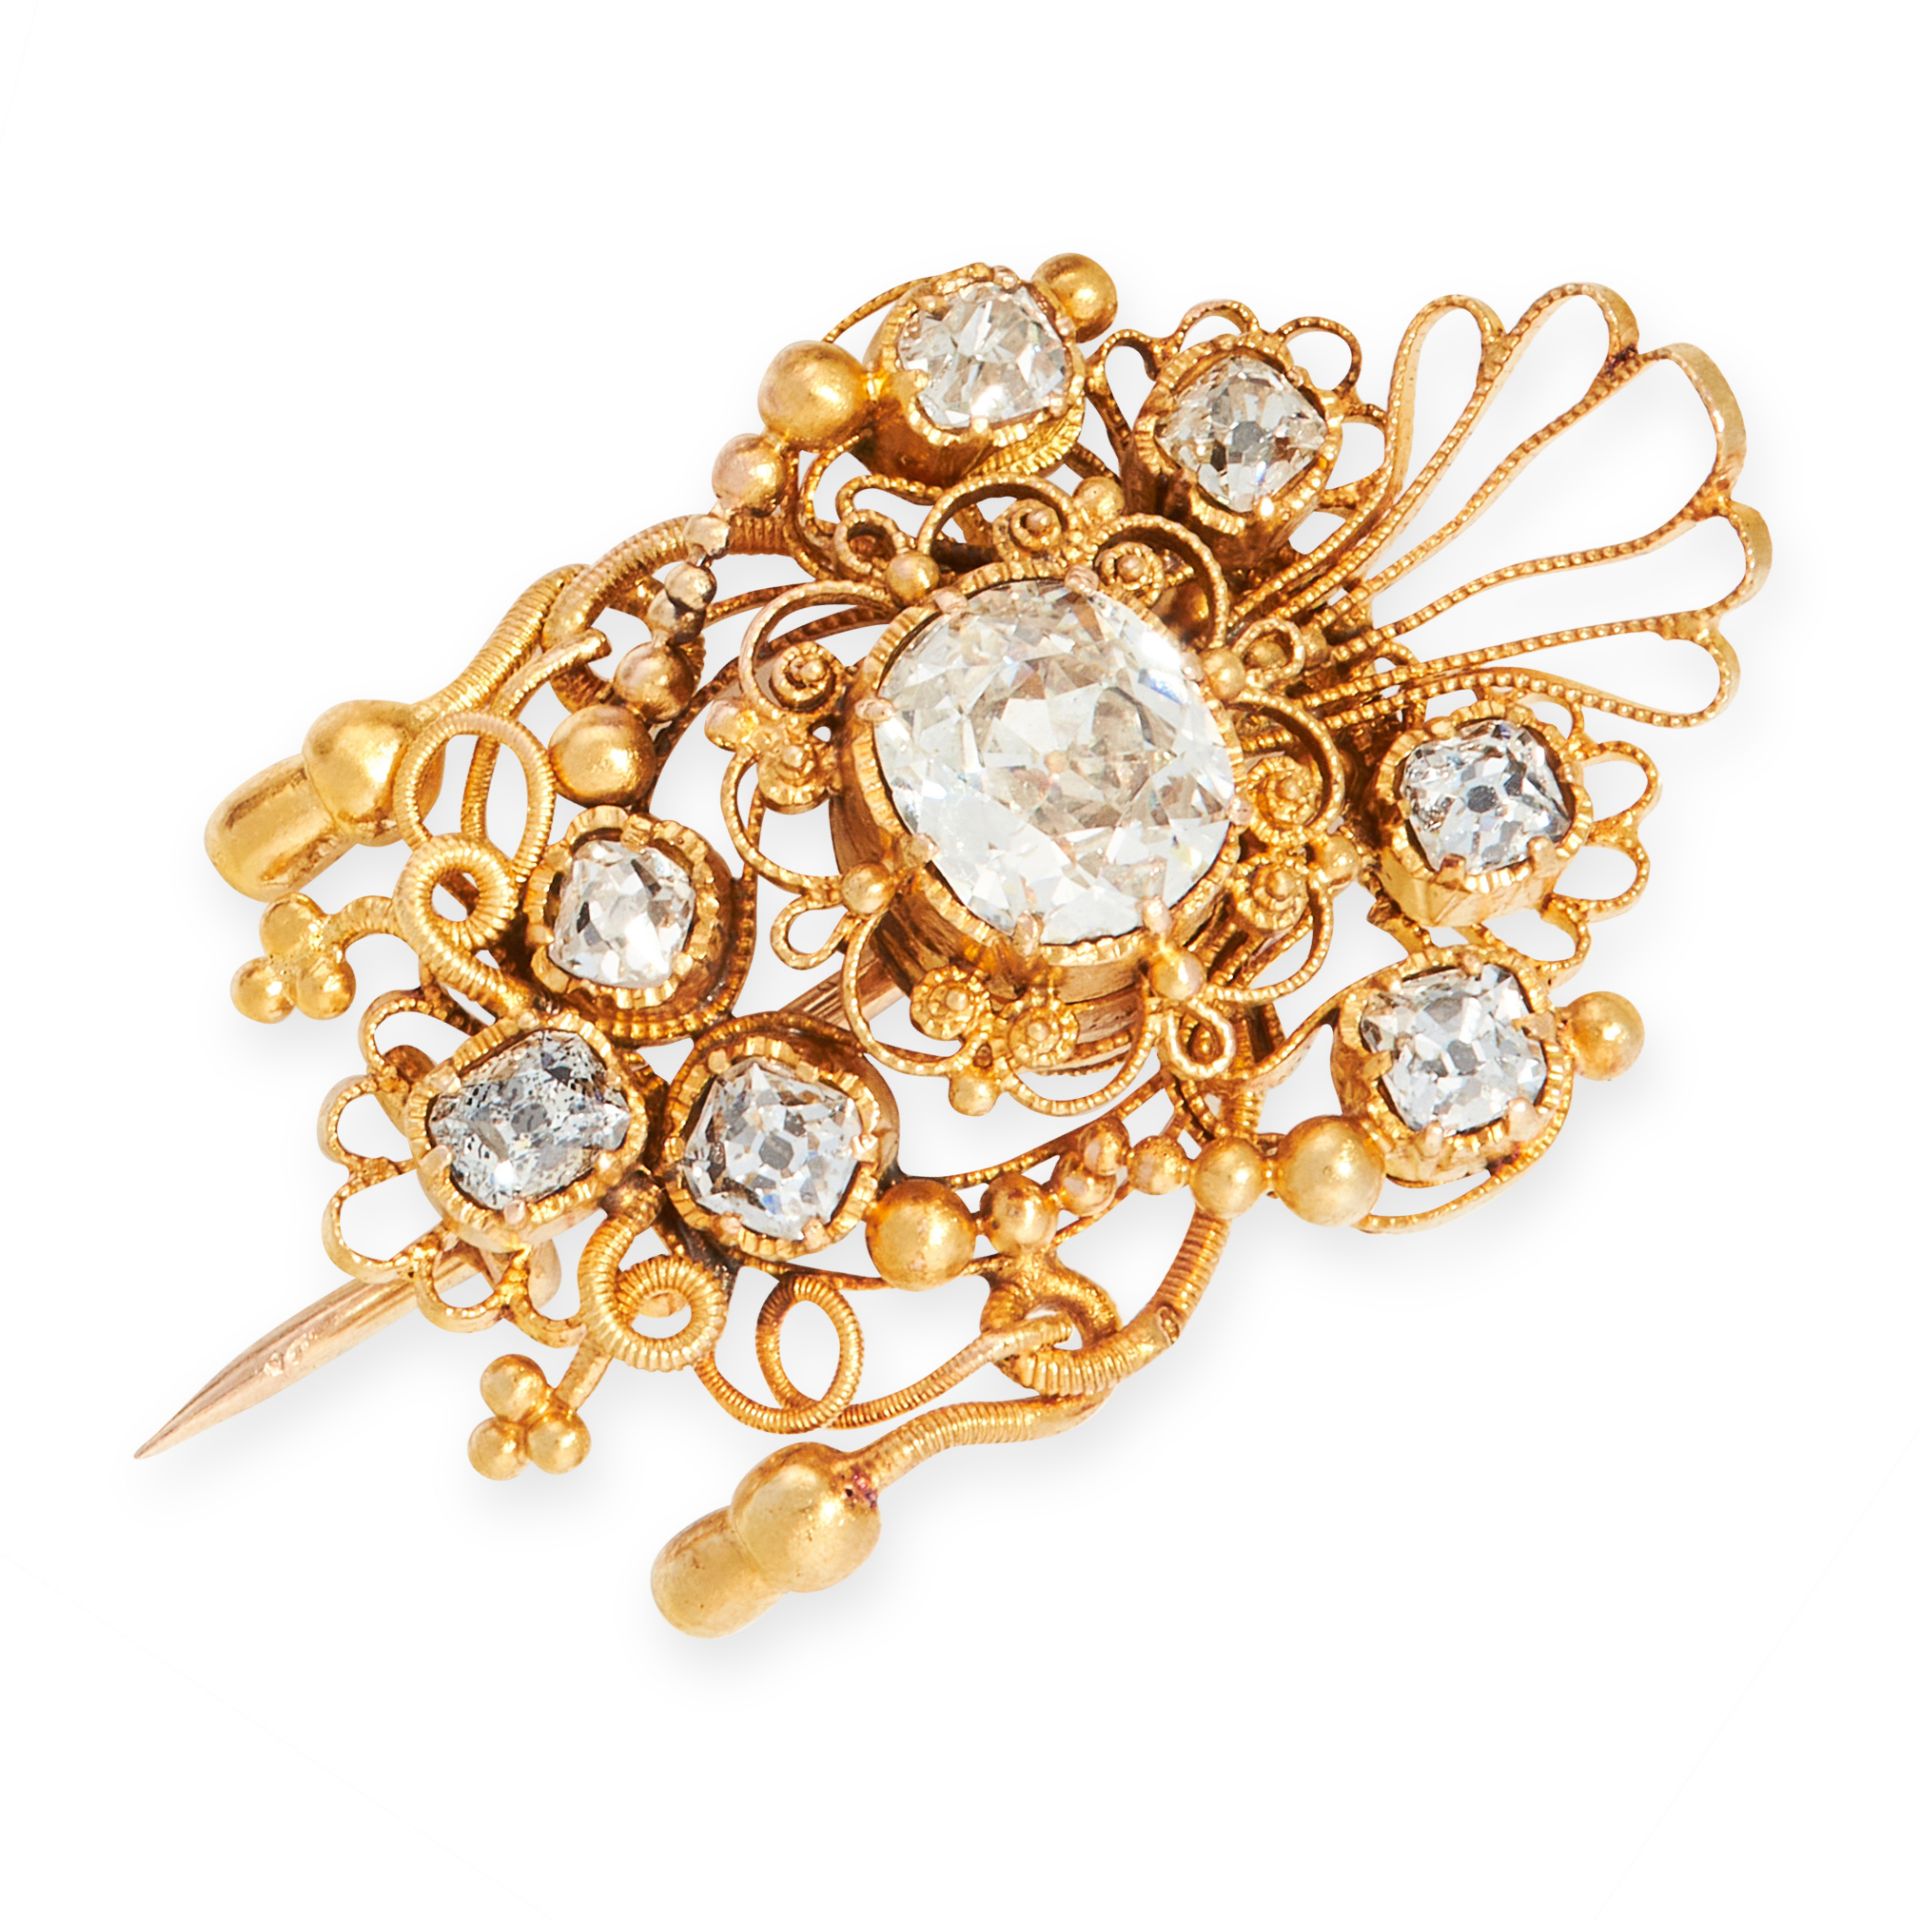 AN ANTIQUE DIAMOND AND HAIRWORK MOURNING LOCKET BROOCH, EARLY 19TH CENTURY in high carat yellow